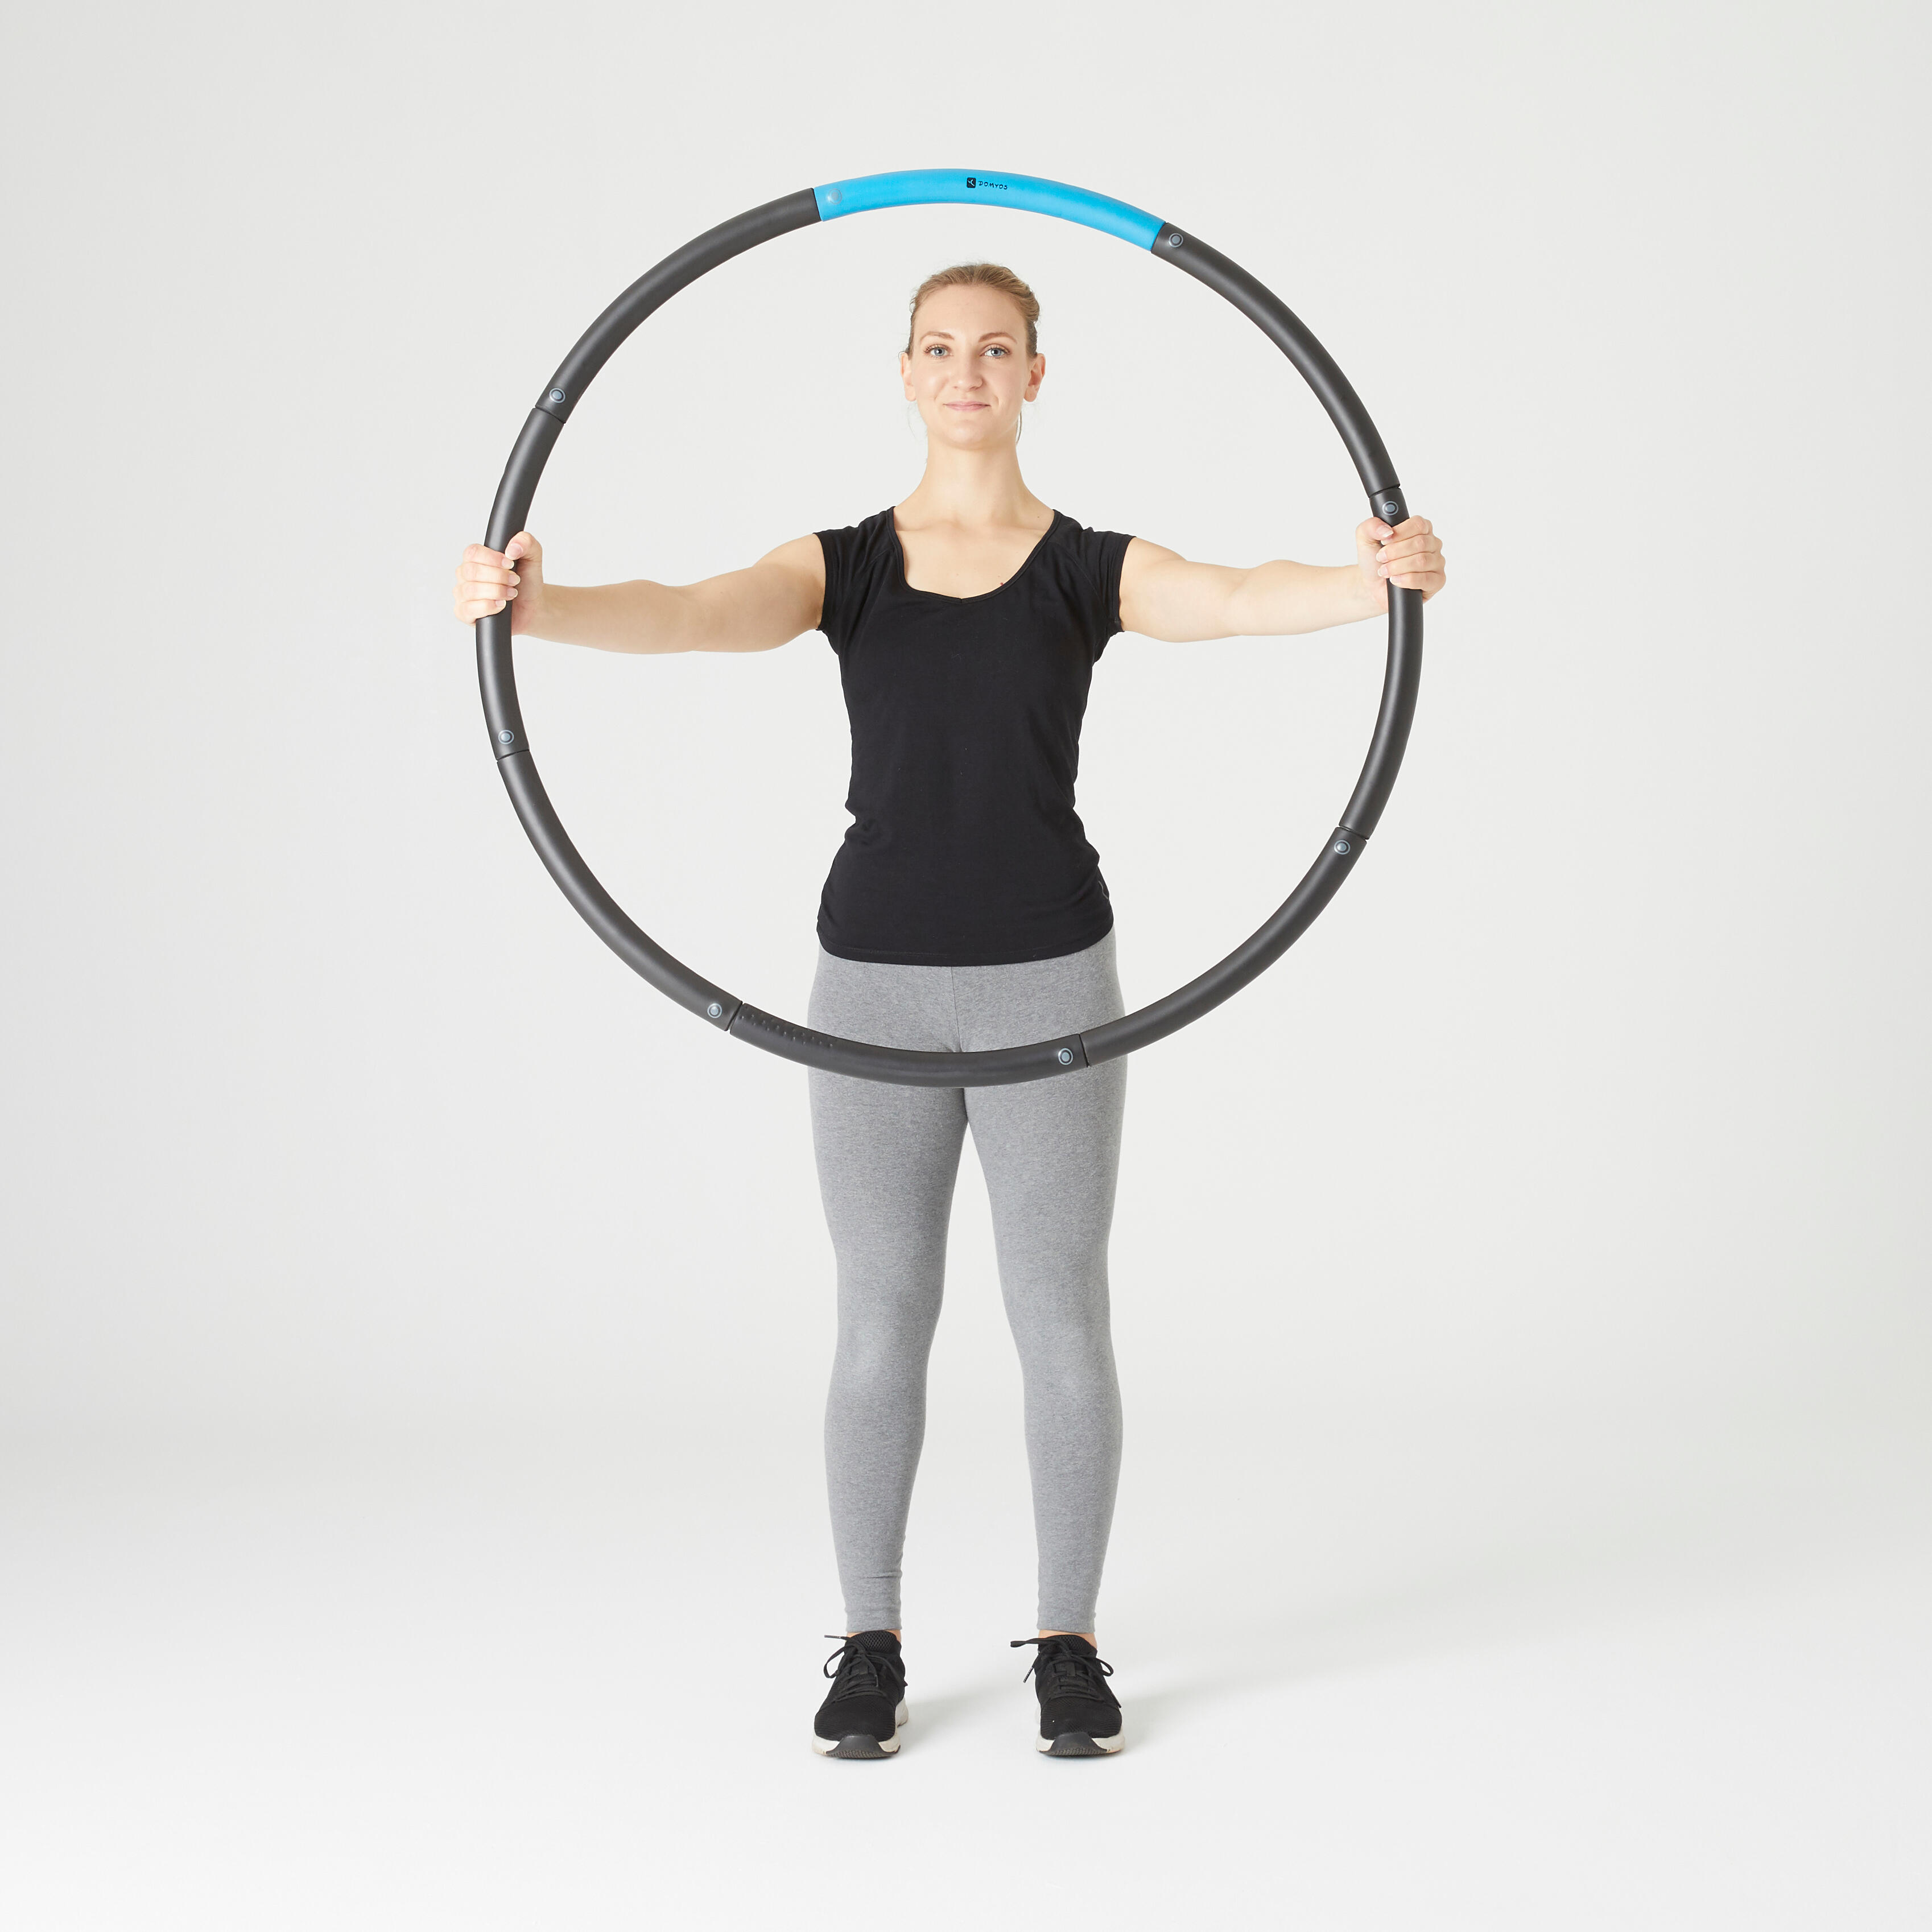 Squire faint scale Weighted Gym Hoop